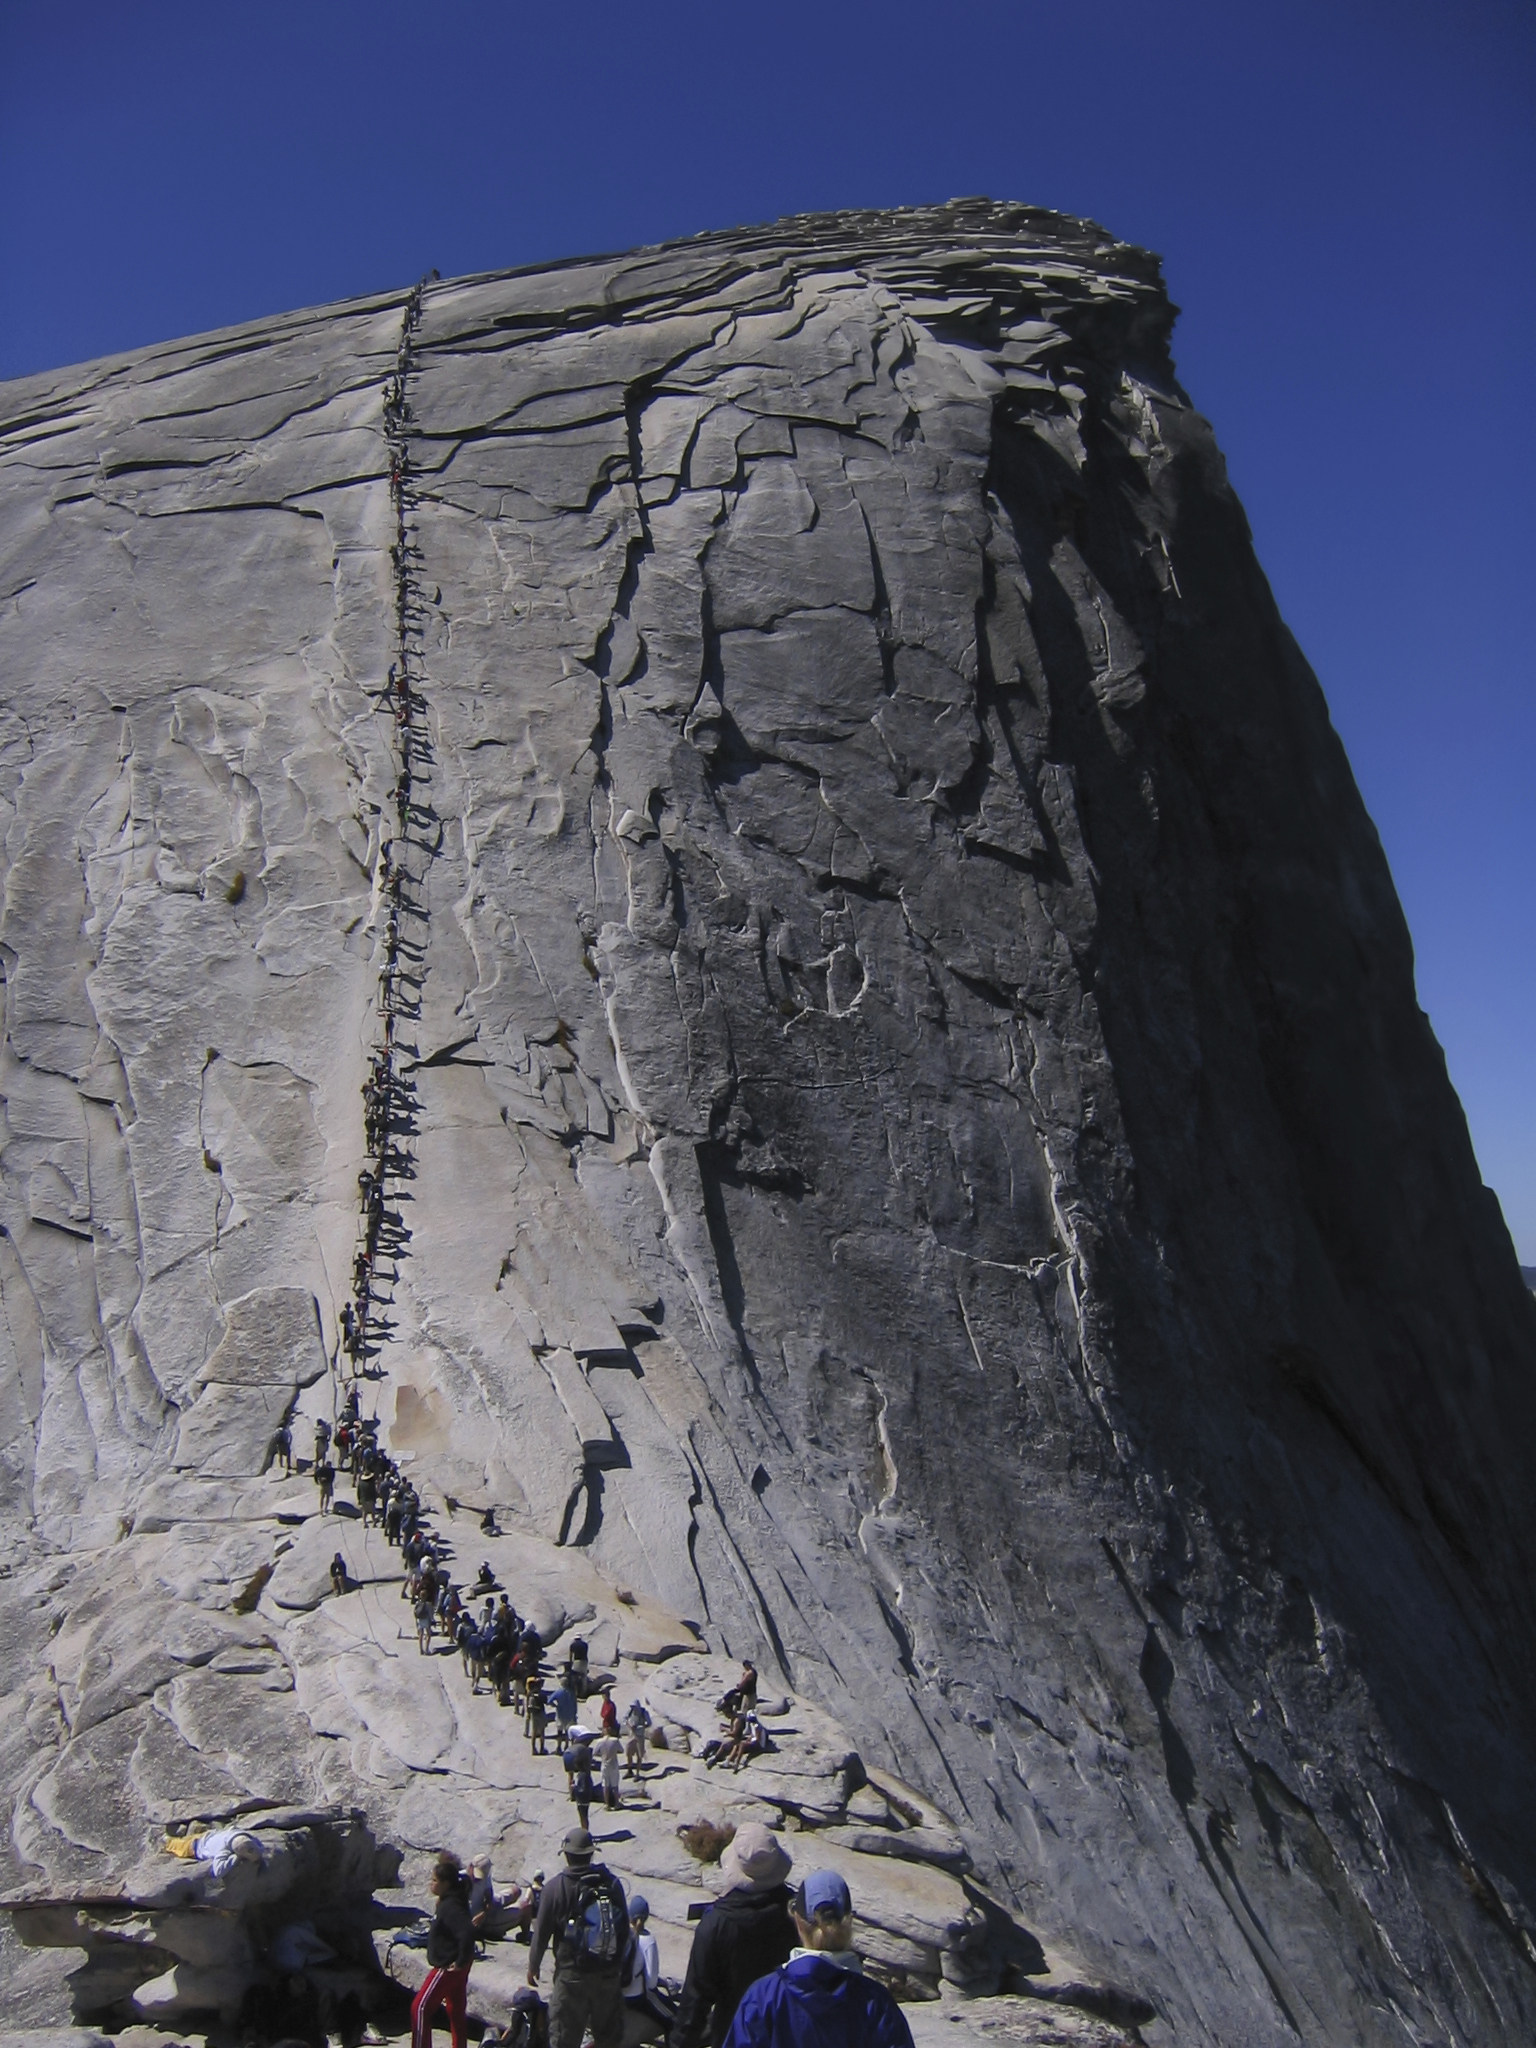 Only 300 Half Dome day hike permits are given out each day, versus the 1,200 daily visitors in 2008. 